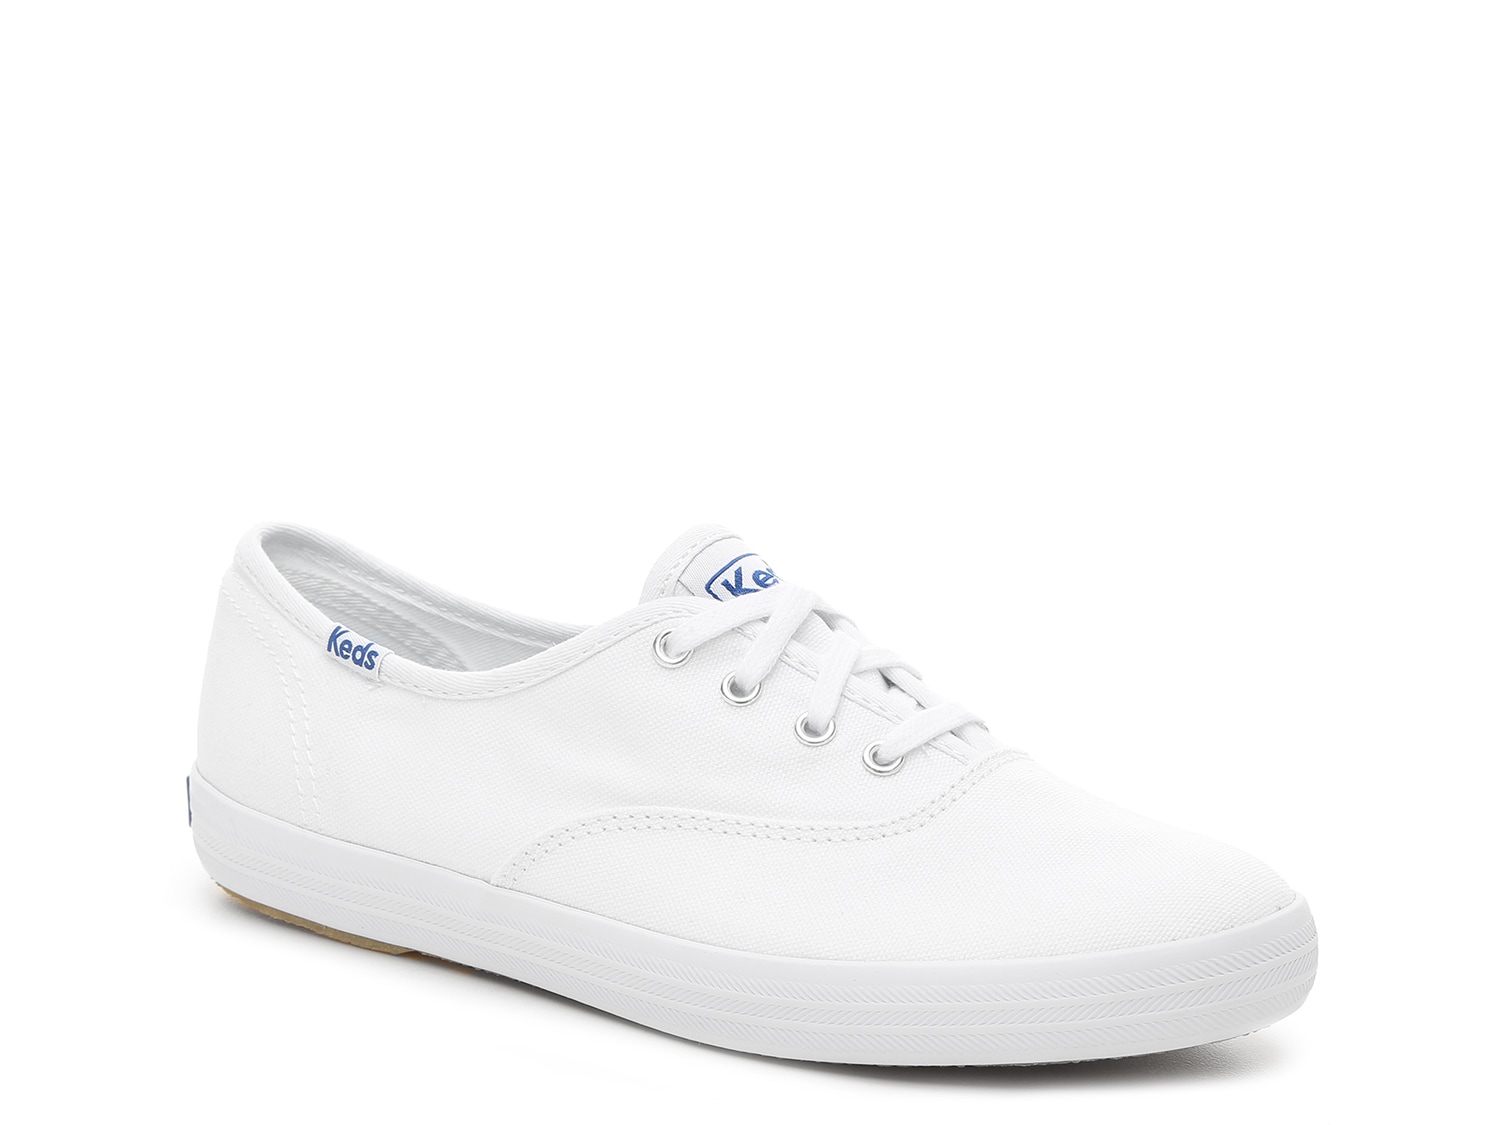 keds women's champion leather oxford sneakers